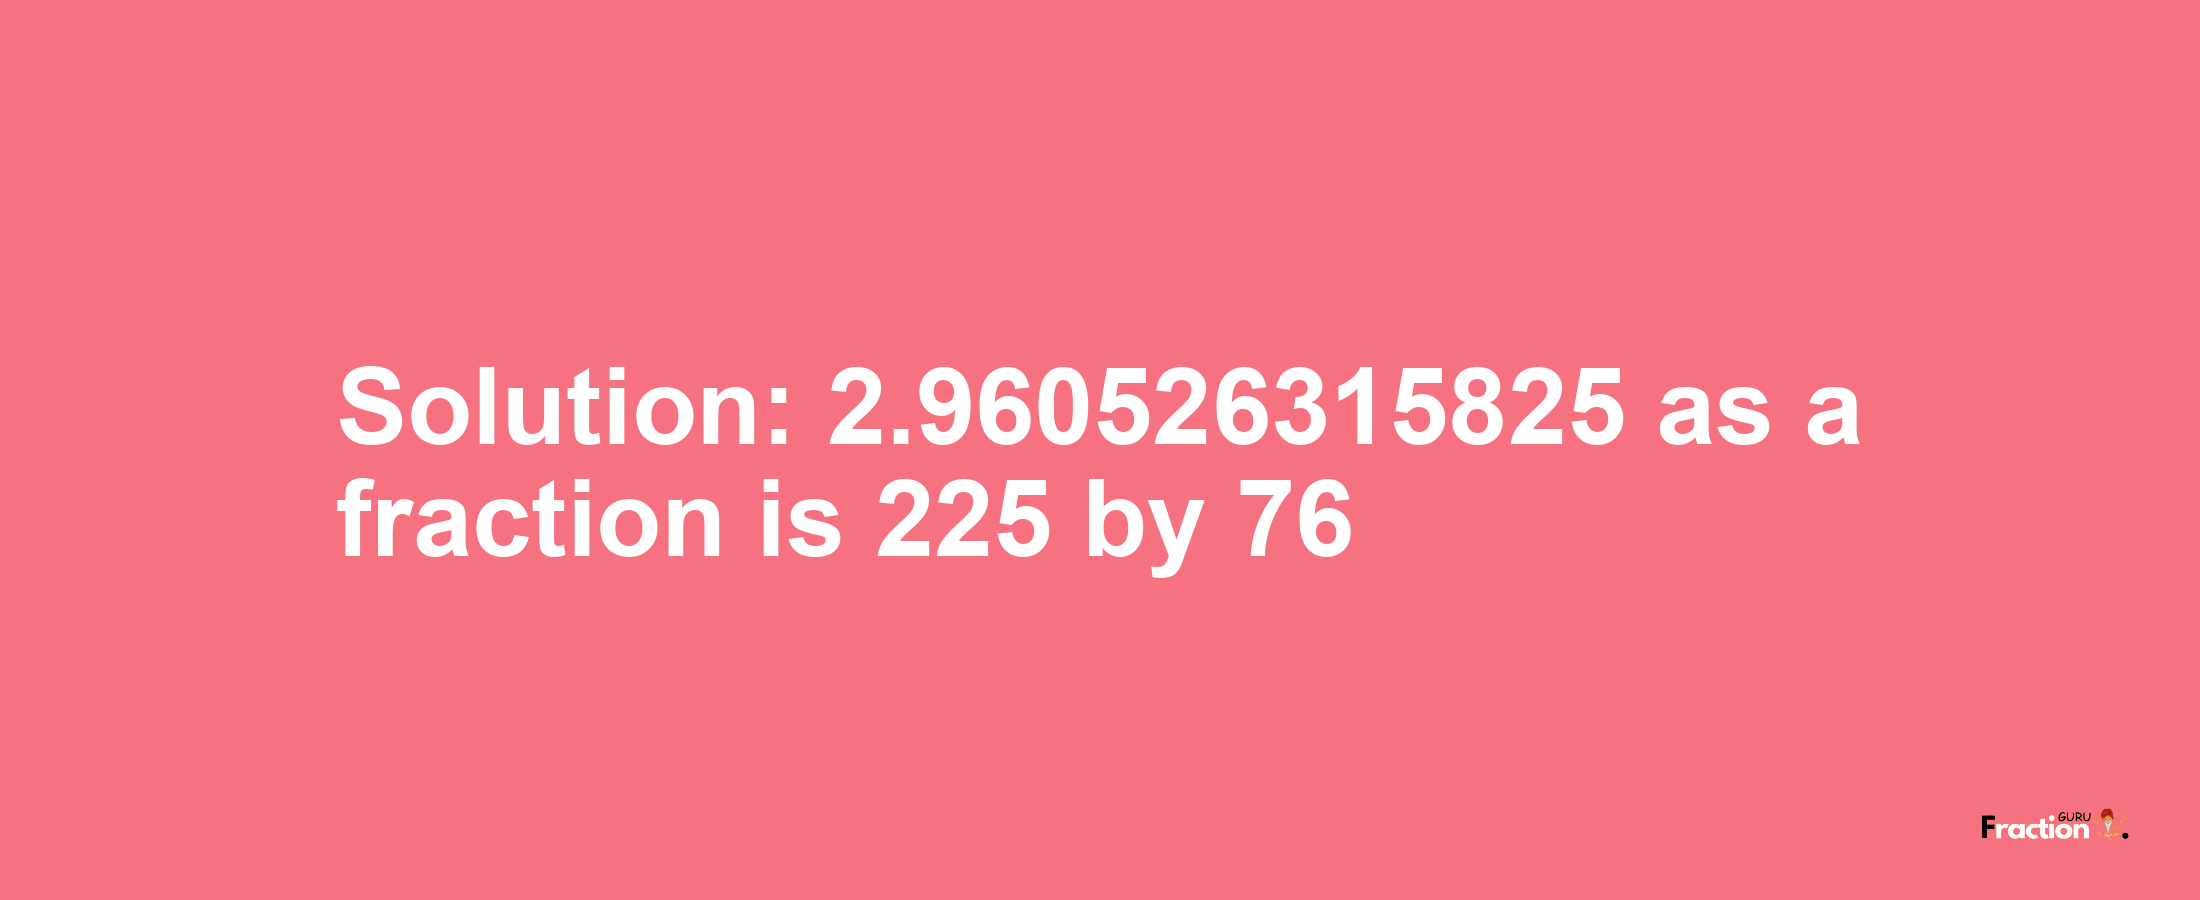 Solution:2.960526315825 as a fraction is 225/76